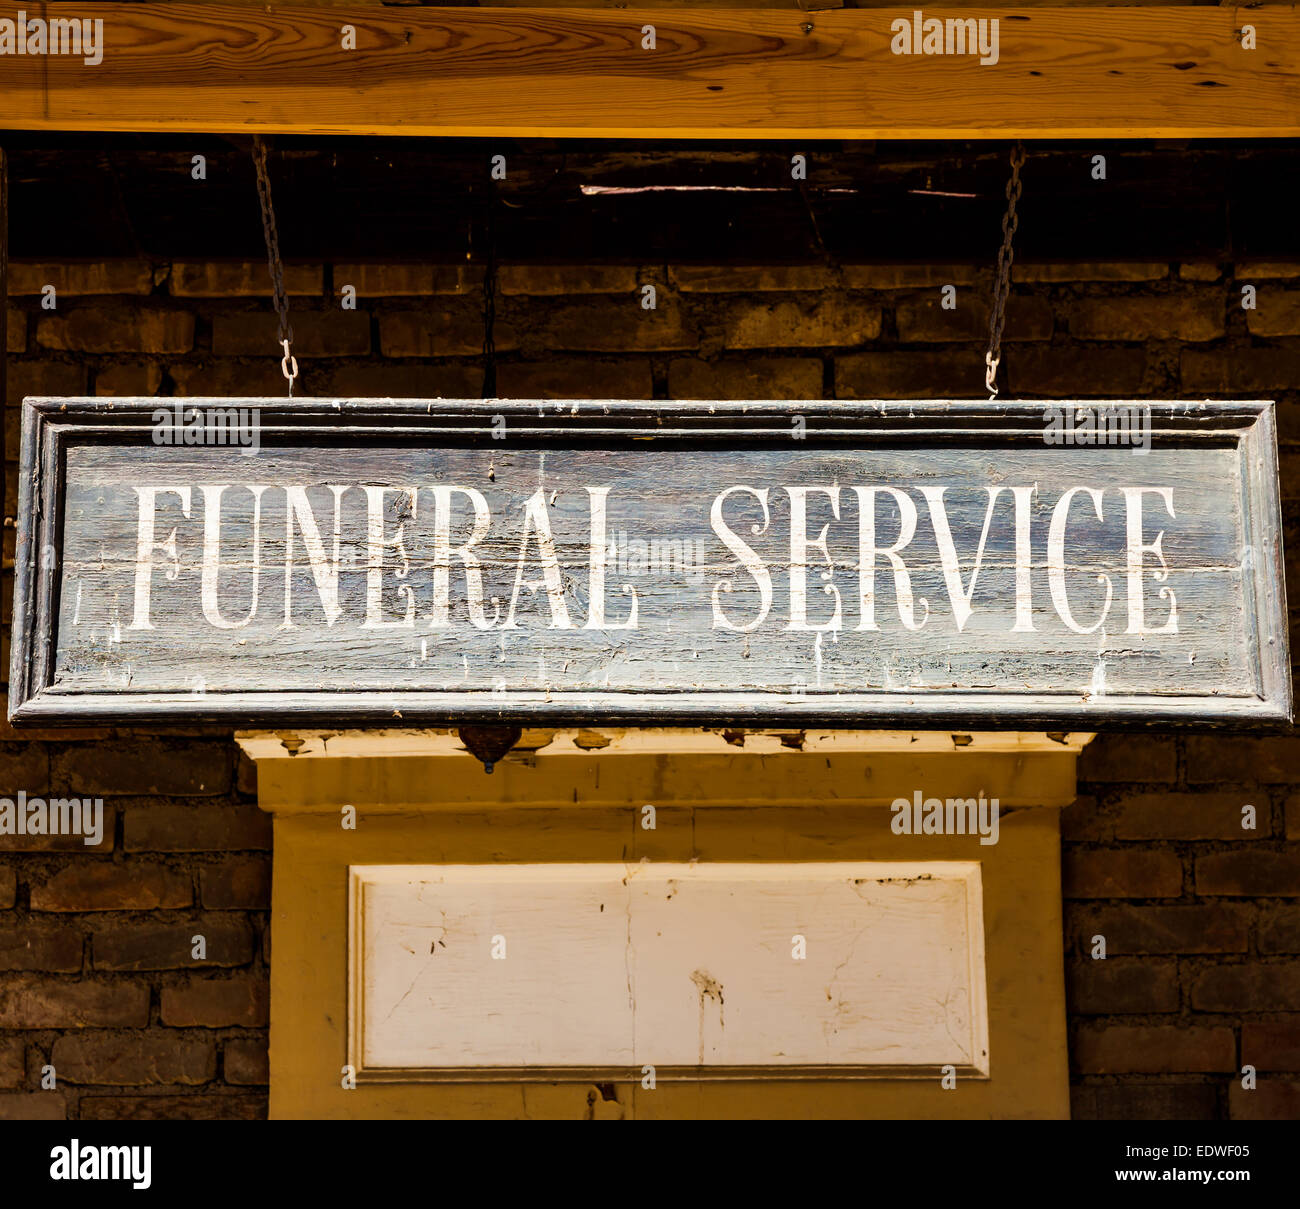 Vintage Funeral Service cartel made of wood. Good for concepts. Stock Photo